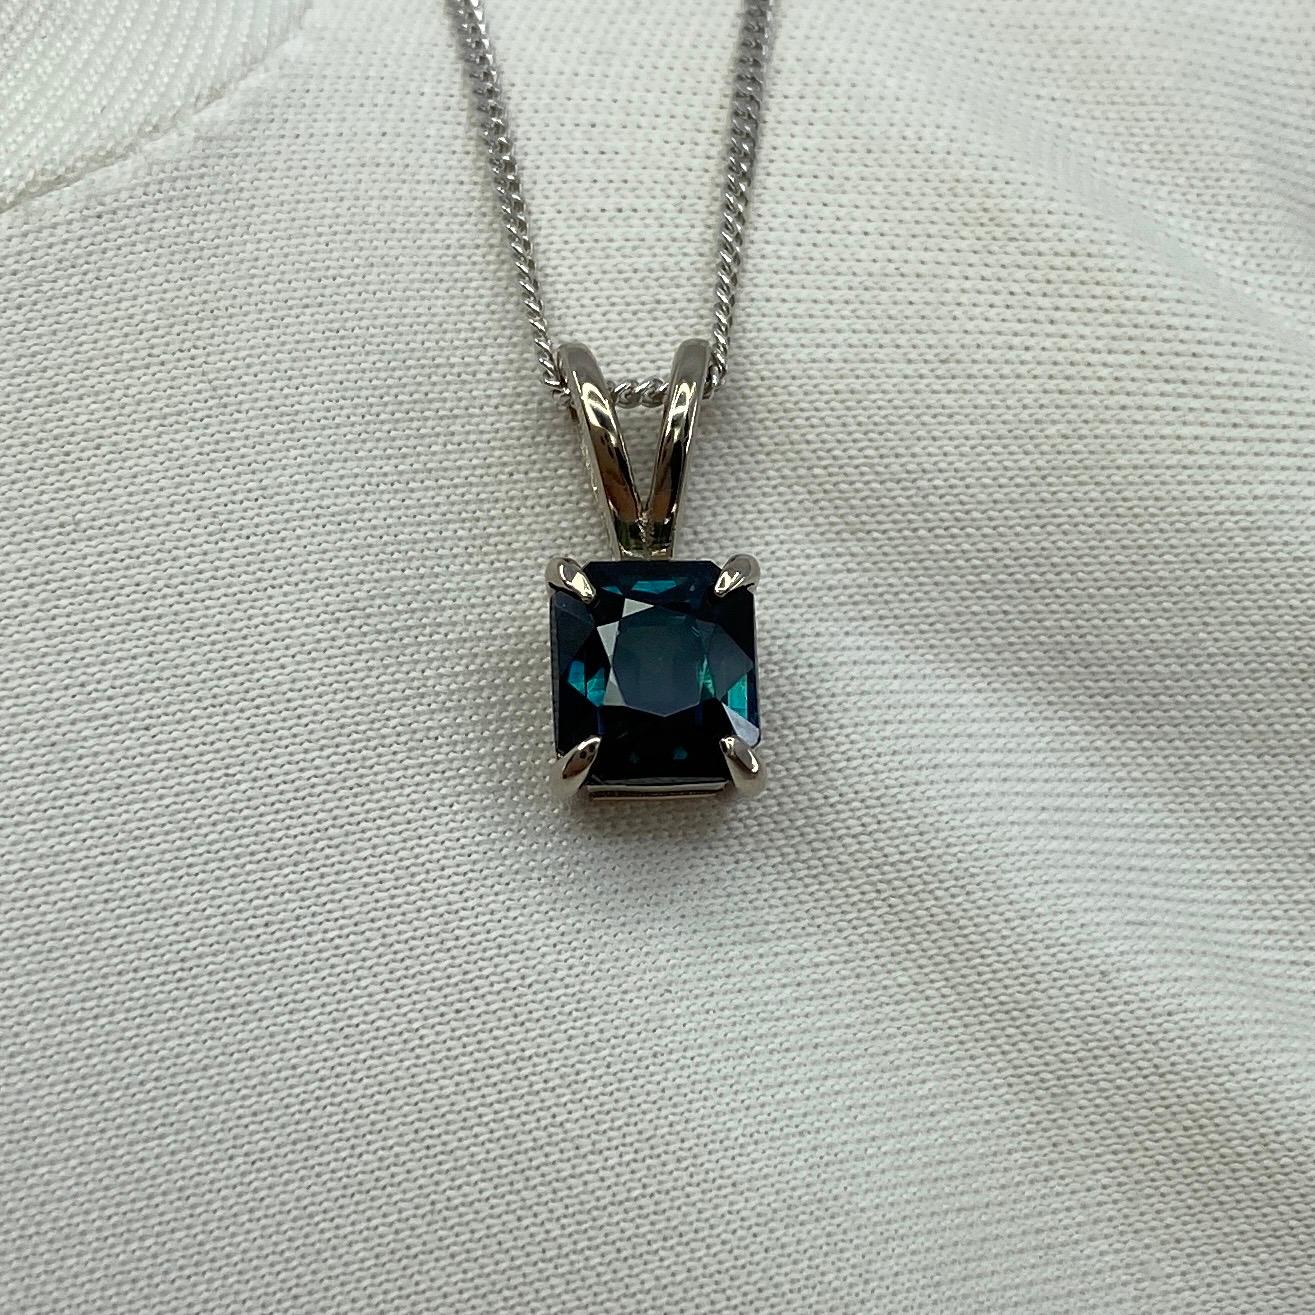 1.44ct IGI Certified Deep Teal Blue Untreated Sapphire 18k White Gold Pendant For Sale 11